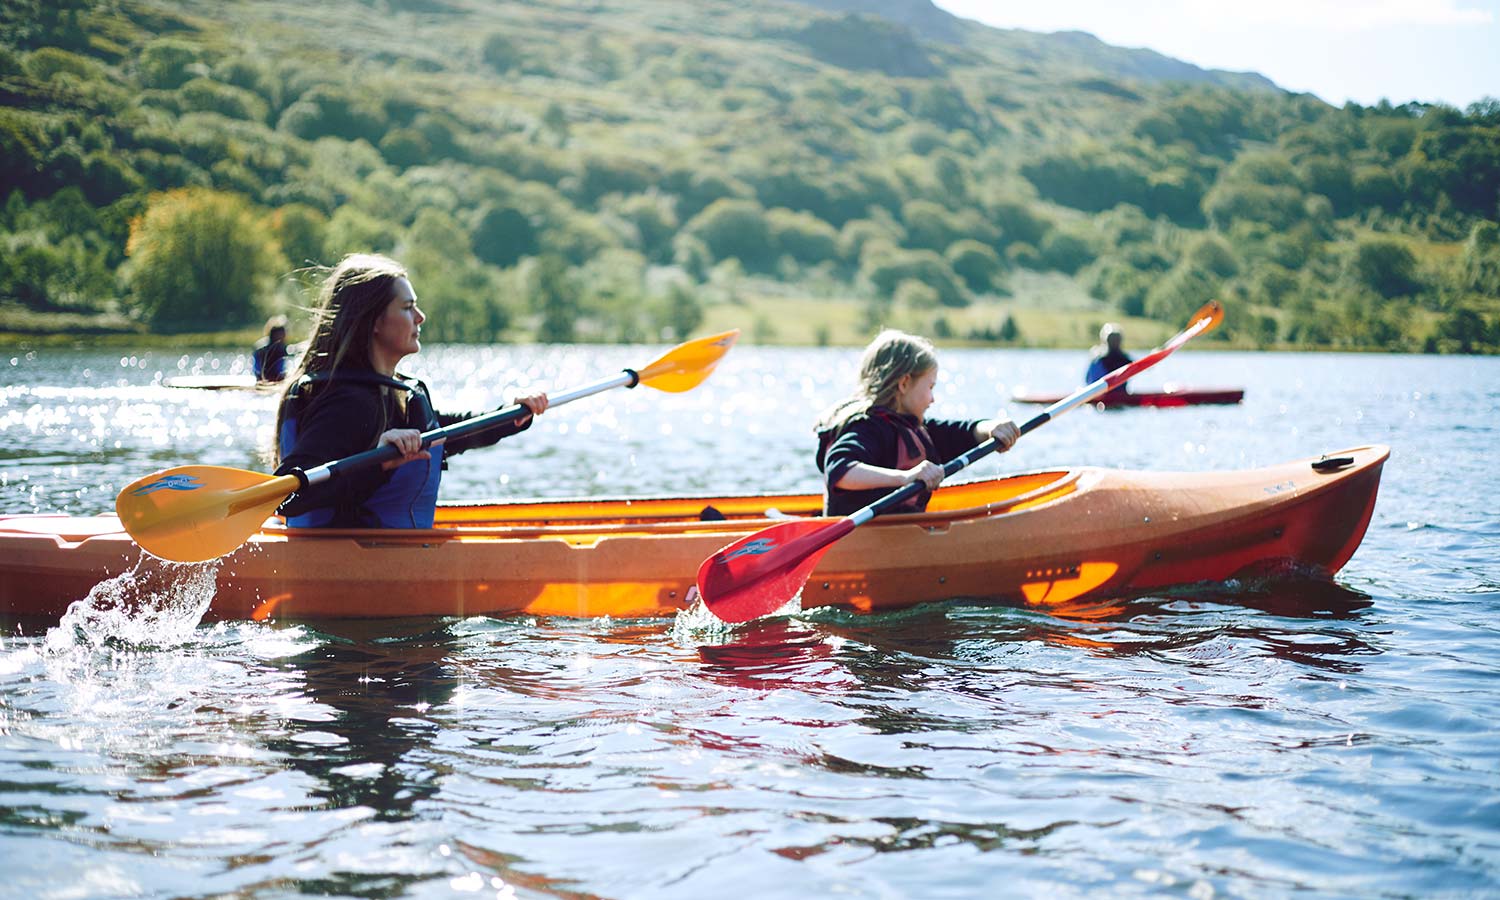 Or if paddling is your thing there are countless lakes and rivers for kayaking and canoeing